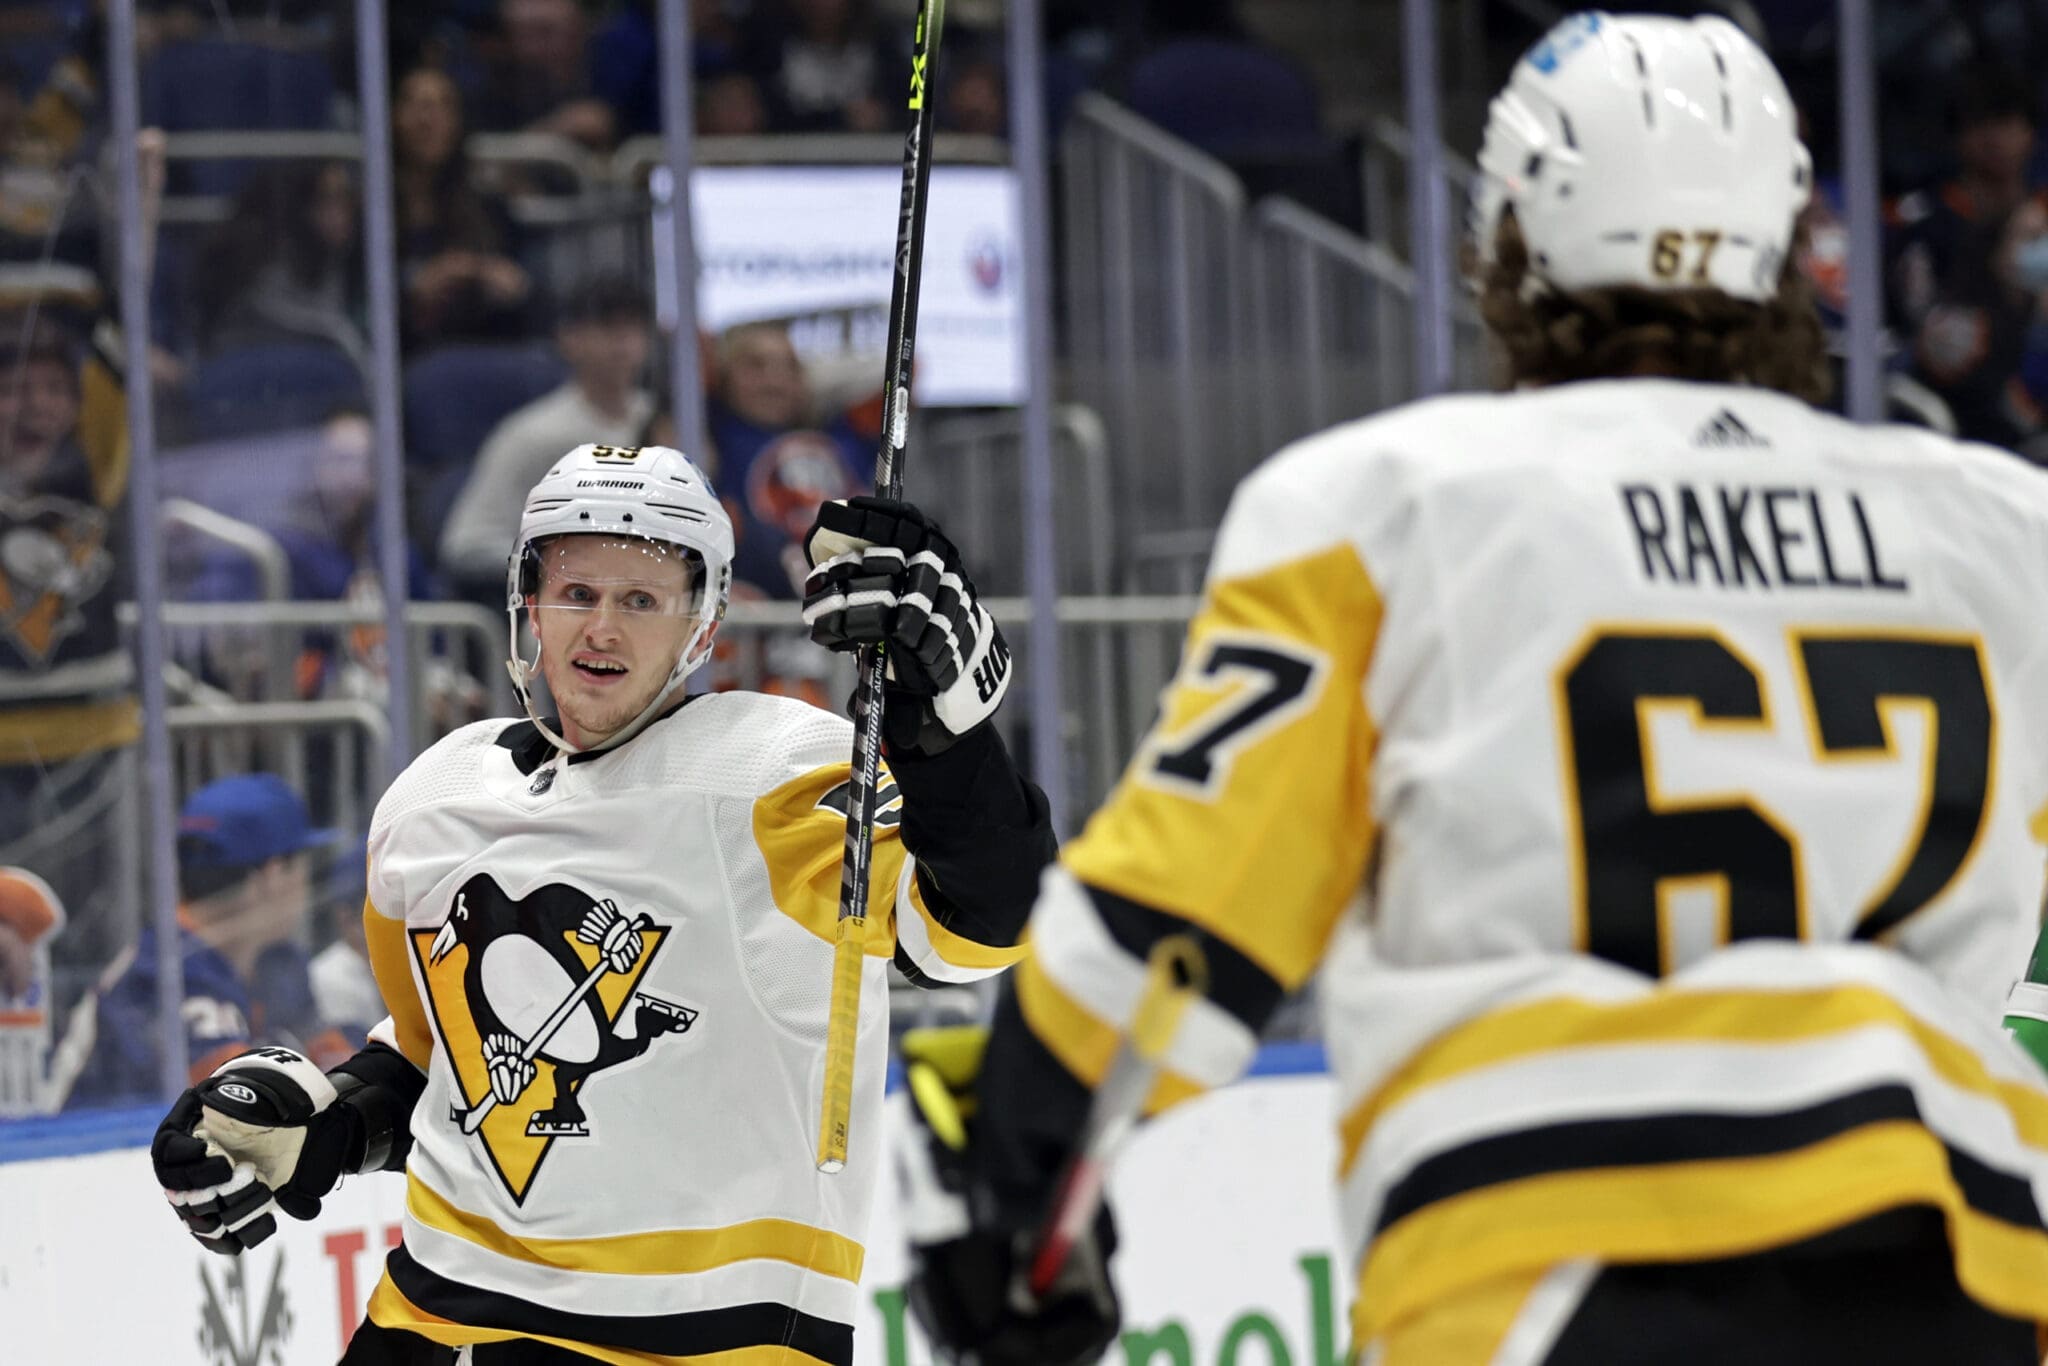 BREAKING: Guentzel is Back on the Ice, Skates Today